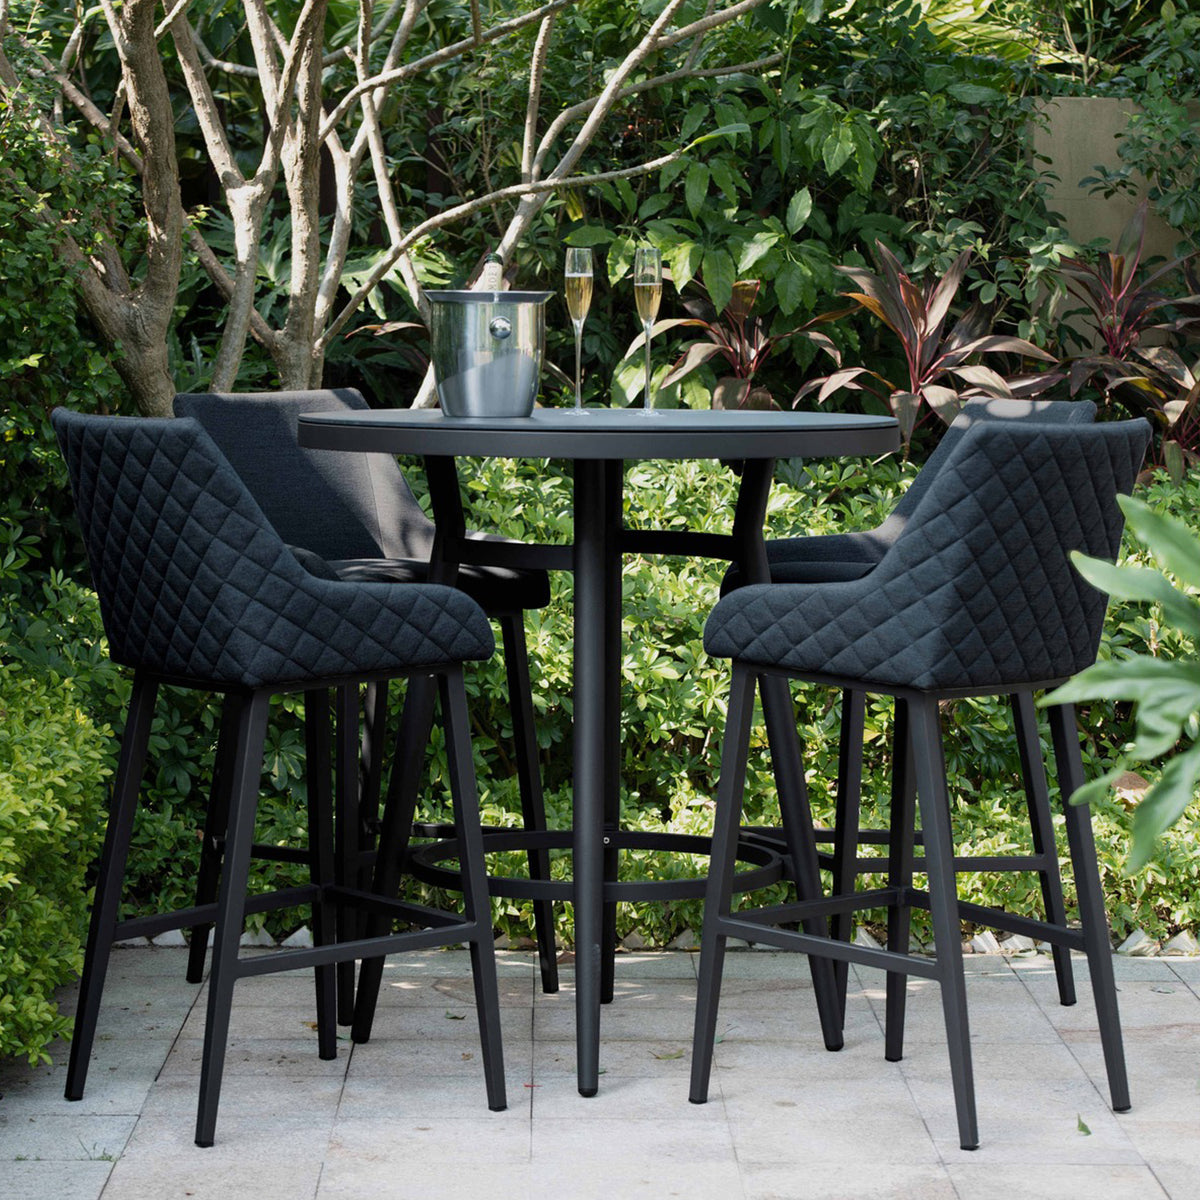 Maze Charcoal Regal 4 Seat Round Outdoor Bar Set from Roseland Furniture